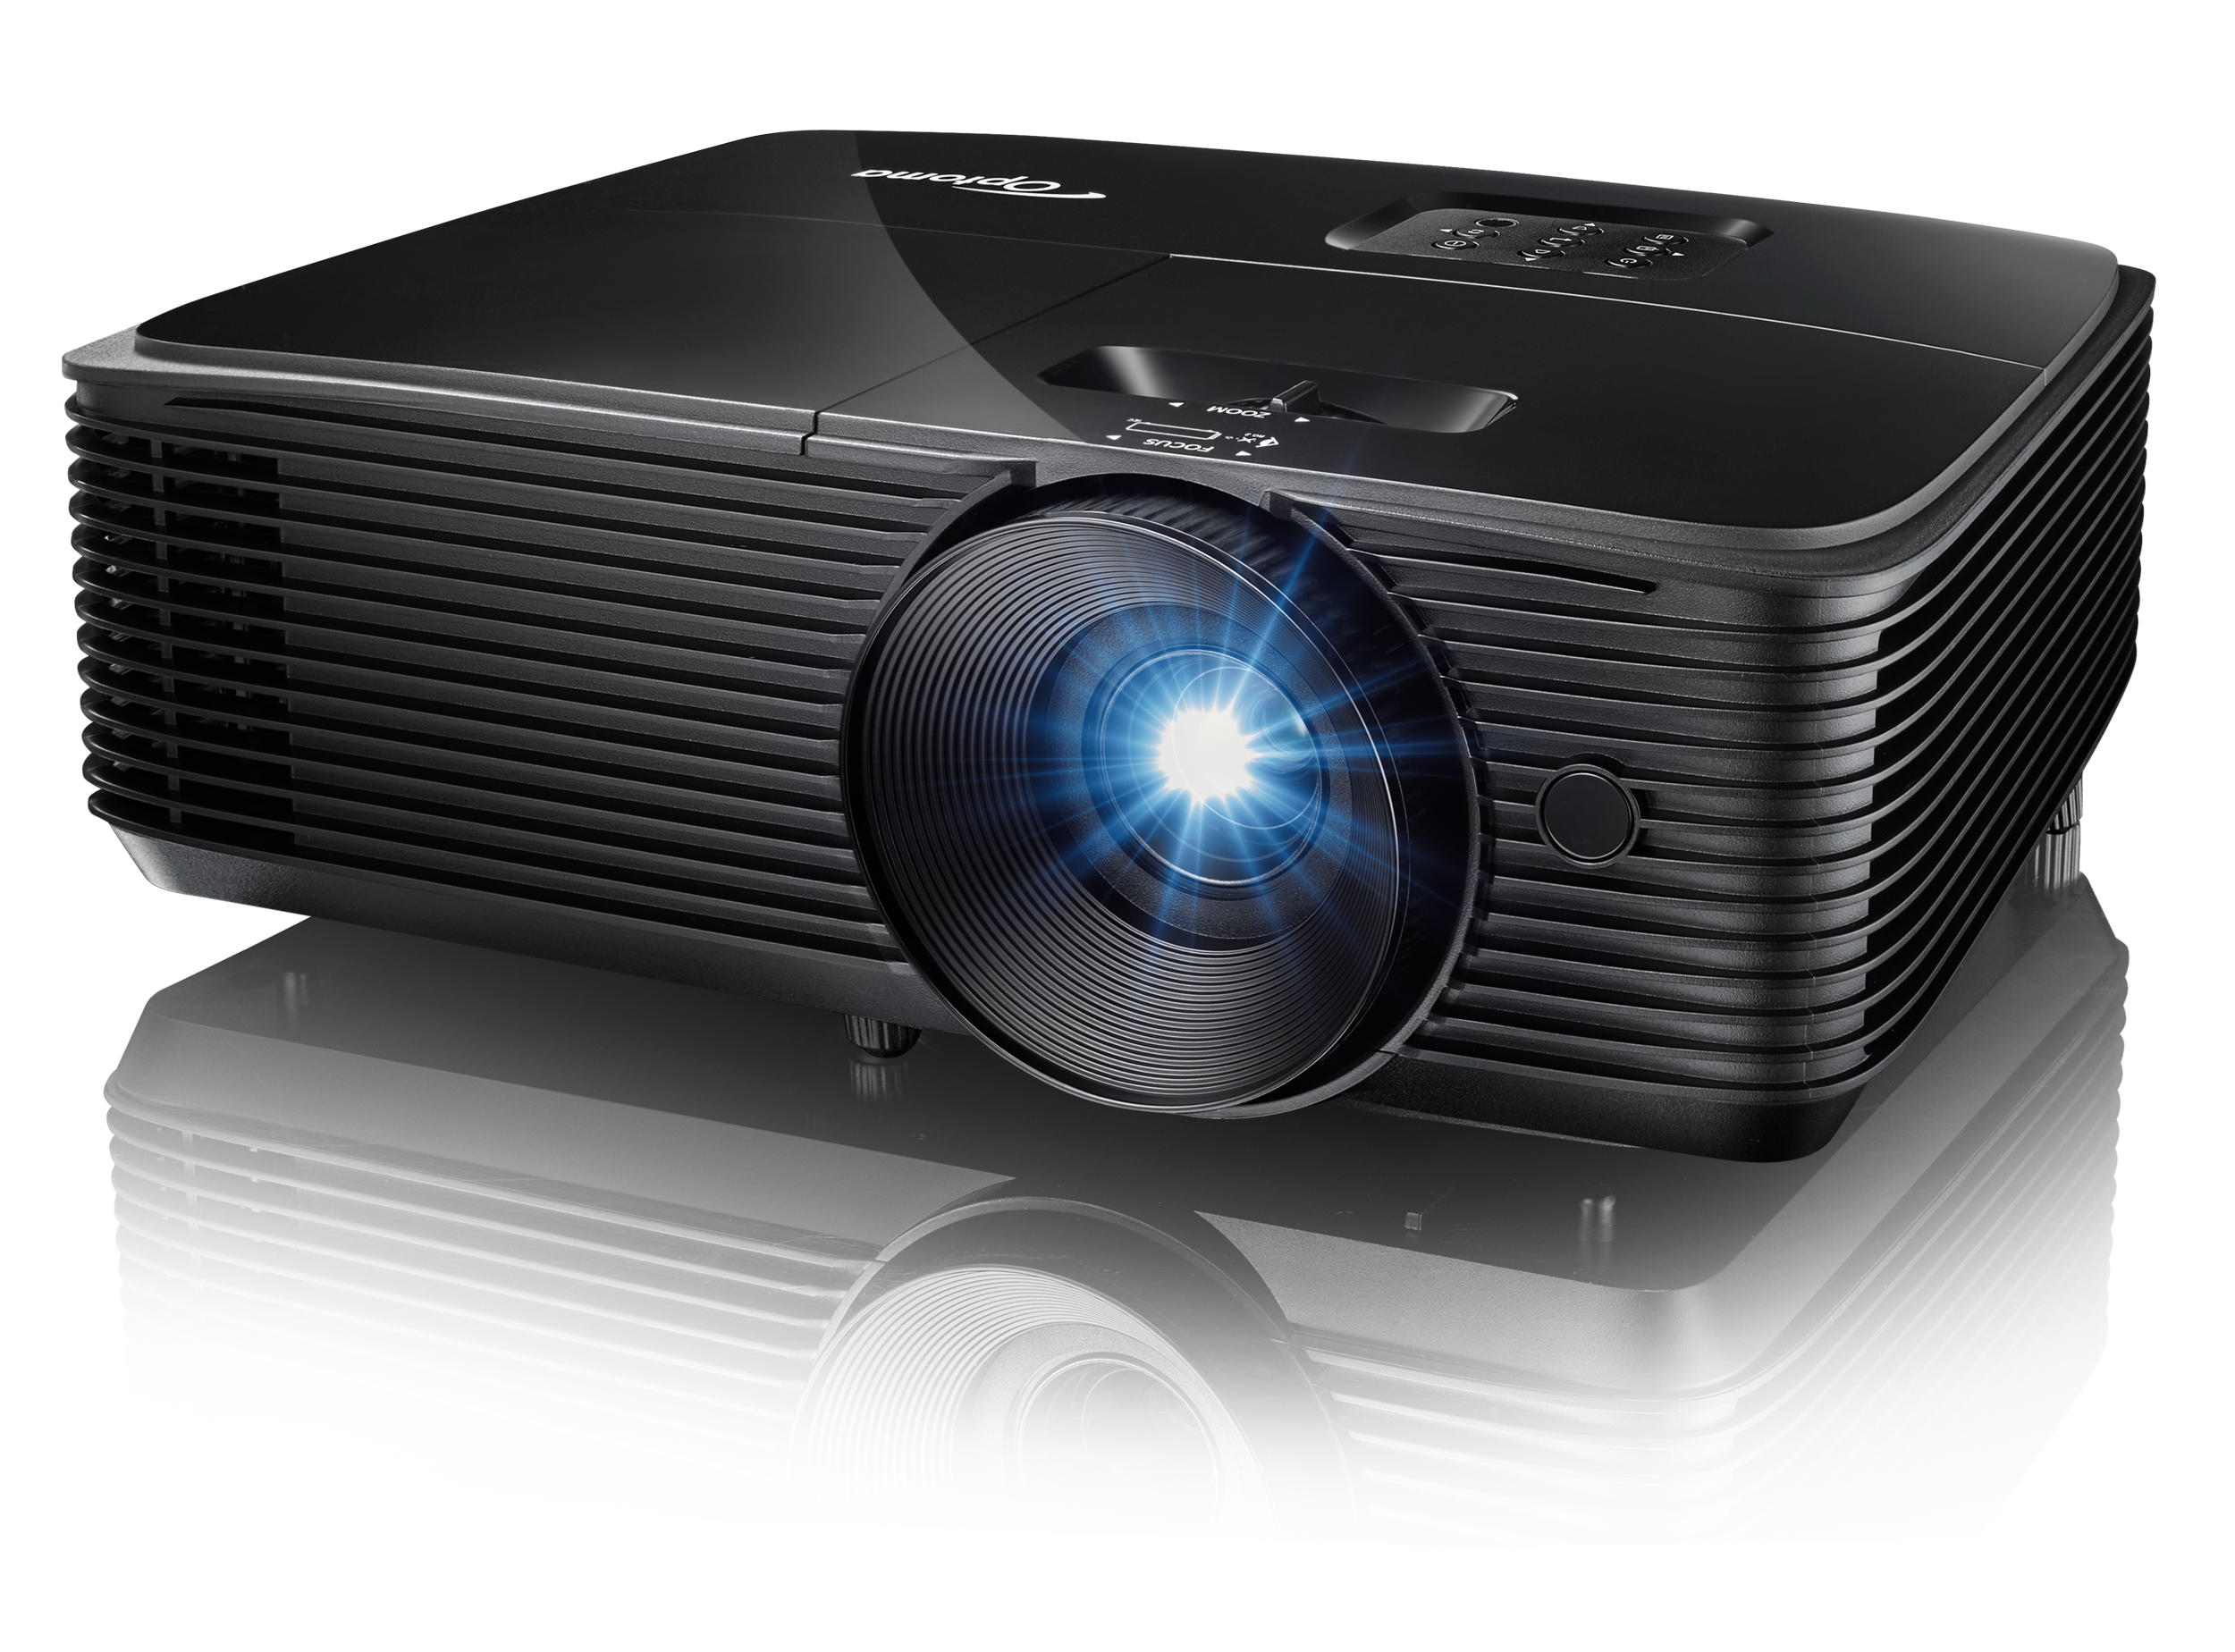 HD146X Full HD 1080p Vibrant Home Theater Projector for Movies and Gaming, 3600 Lumens - image 3 of 9